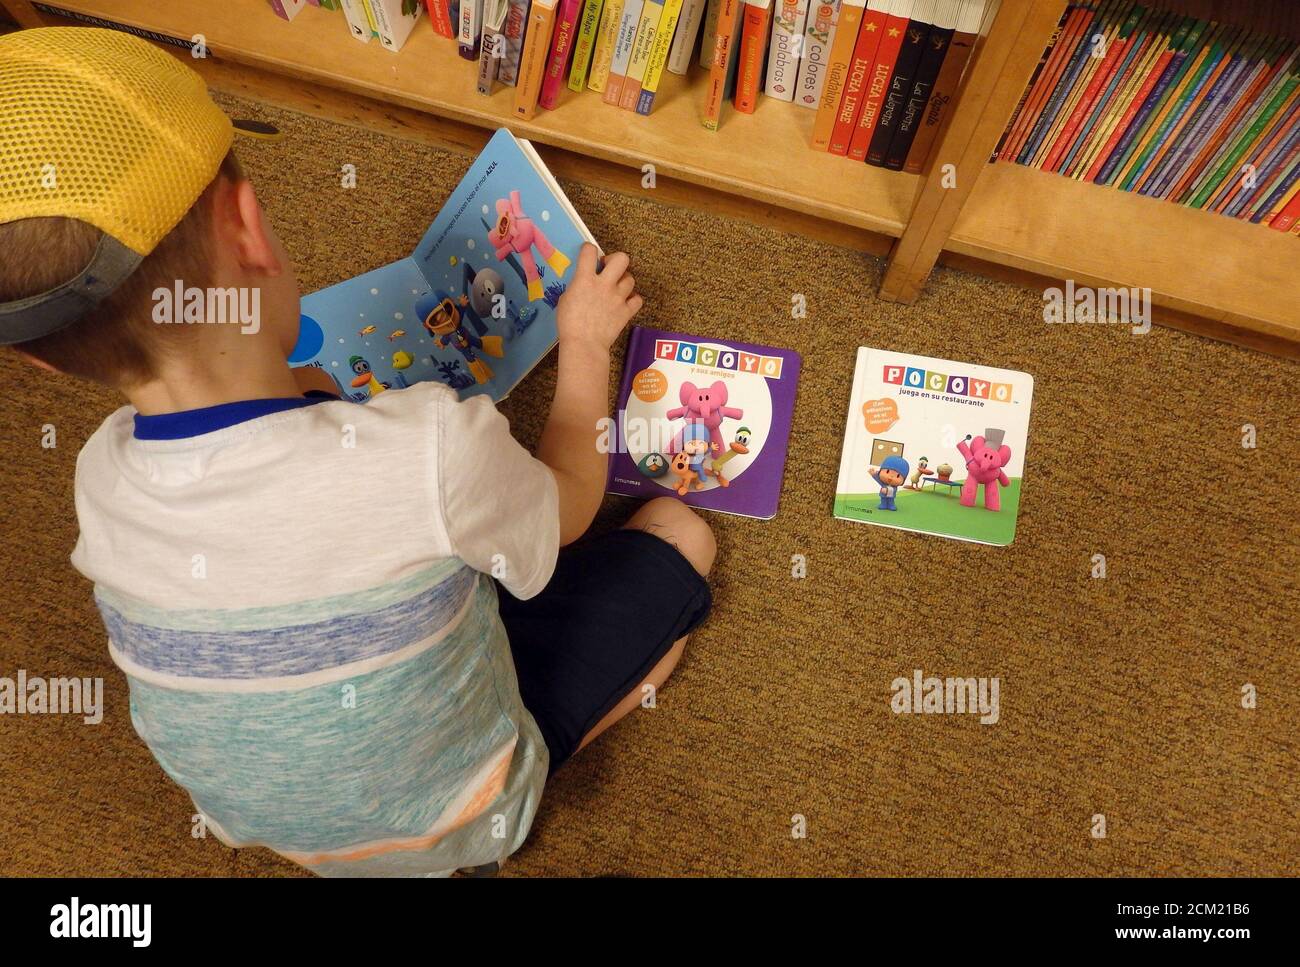 A young boy reading books on the floor. Stock Photo